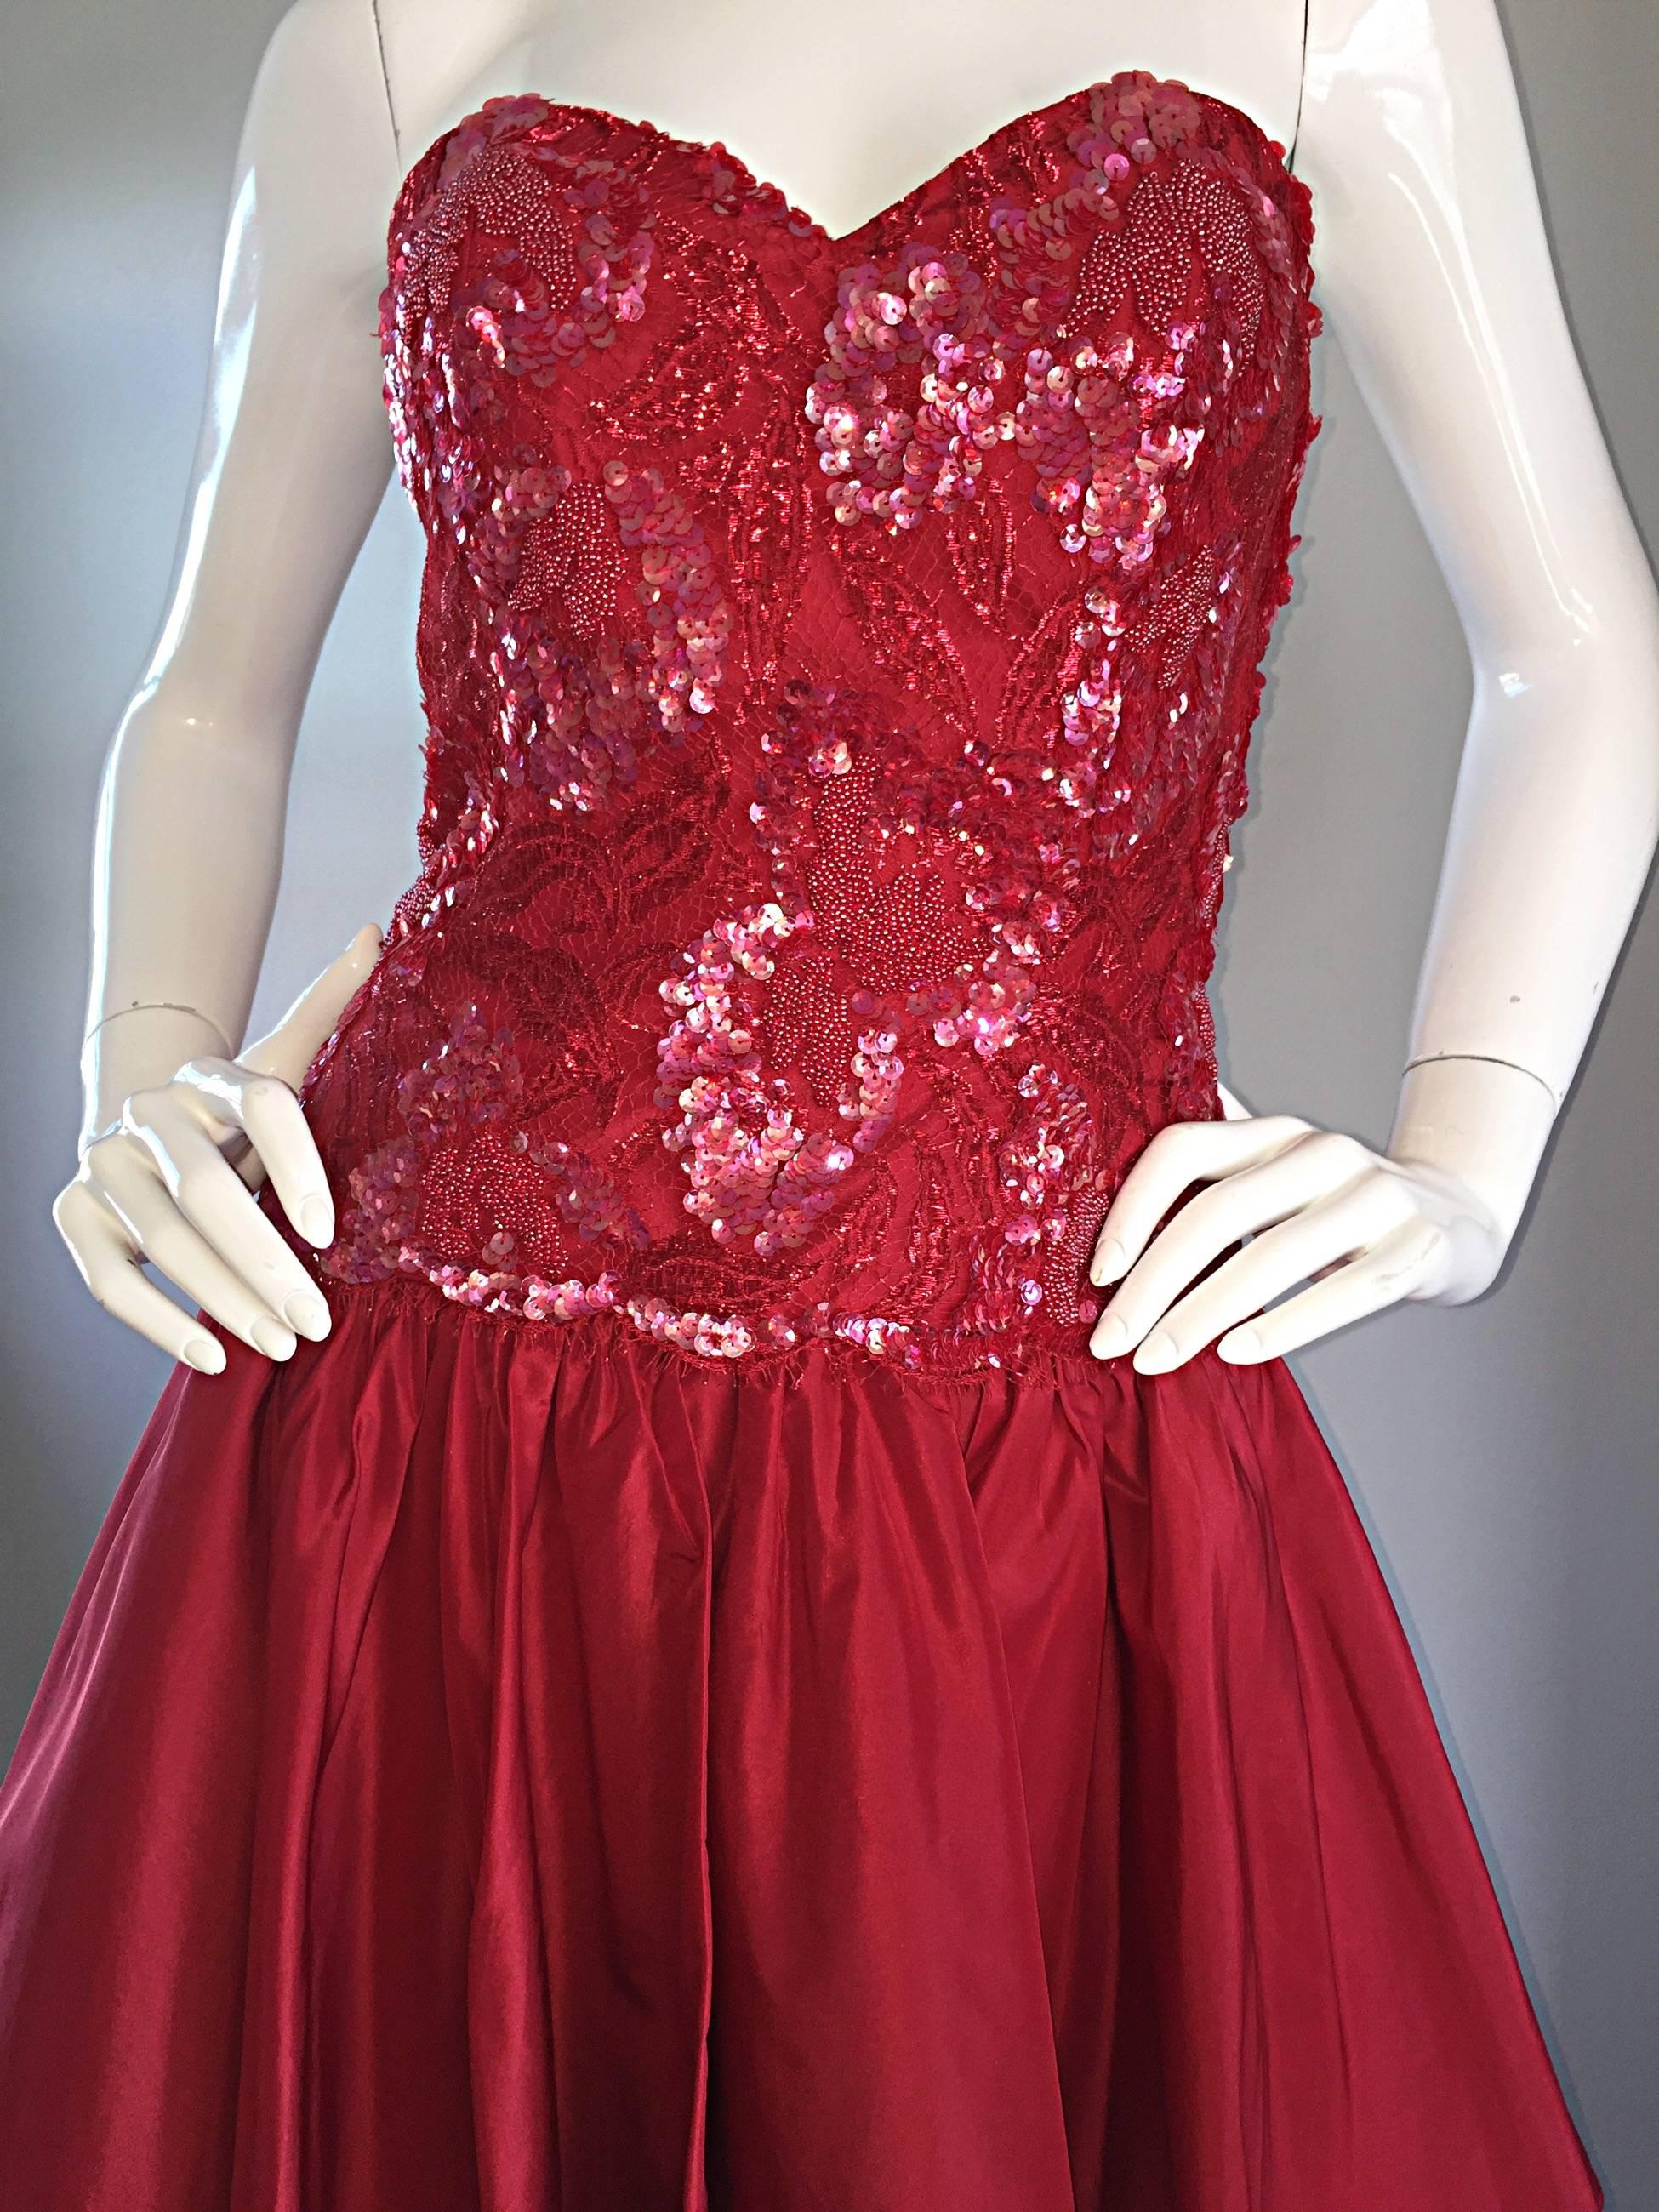 Joanna Mastroianni Beautiful Vintage 90s Candy Apple Red Strapless Sequin Dress For Sale 2